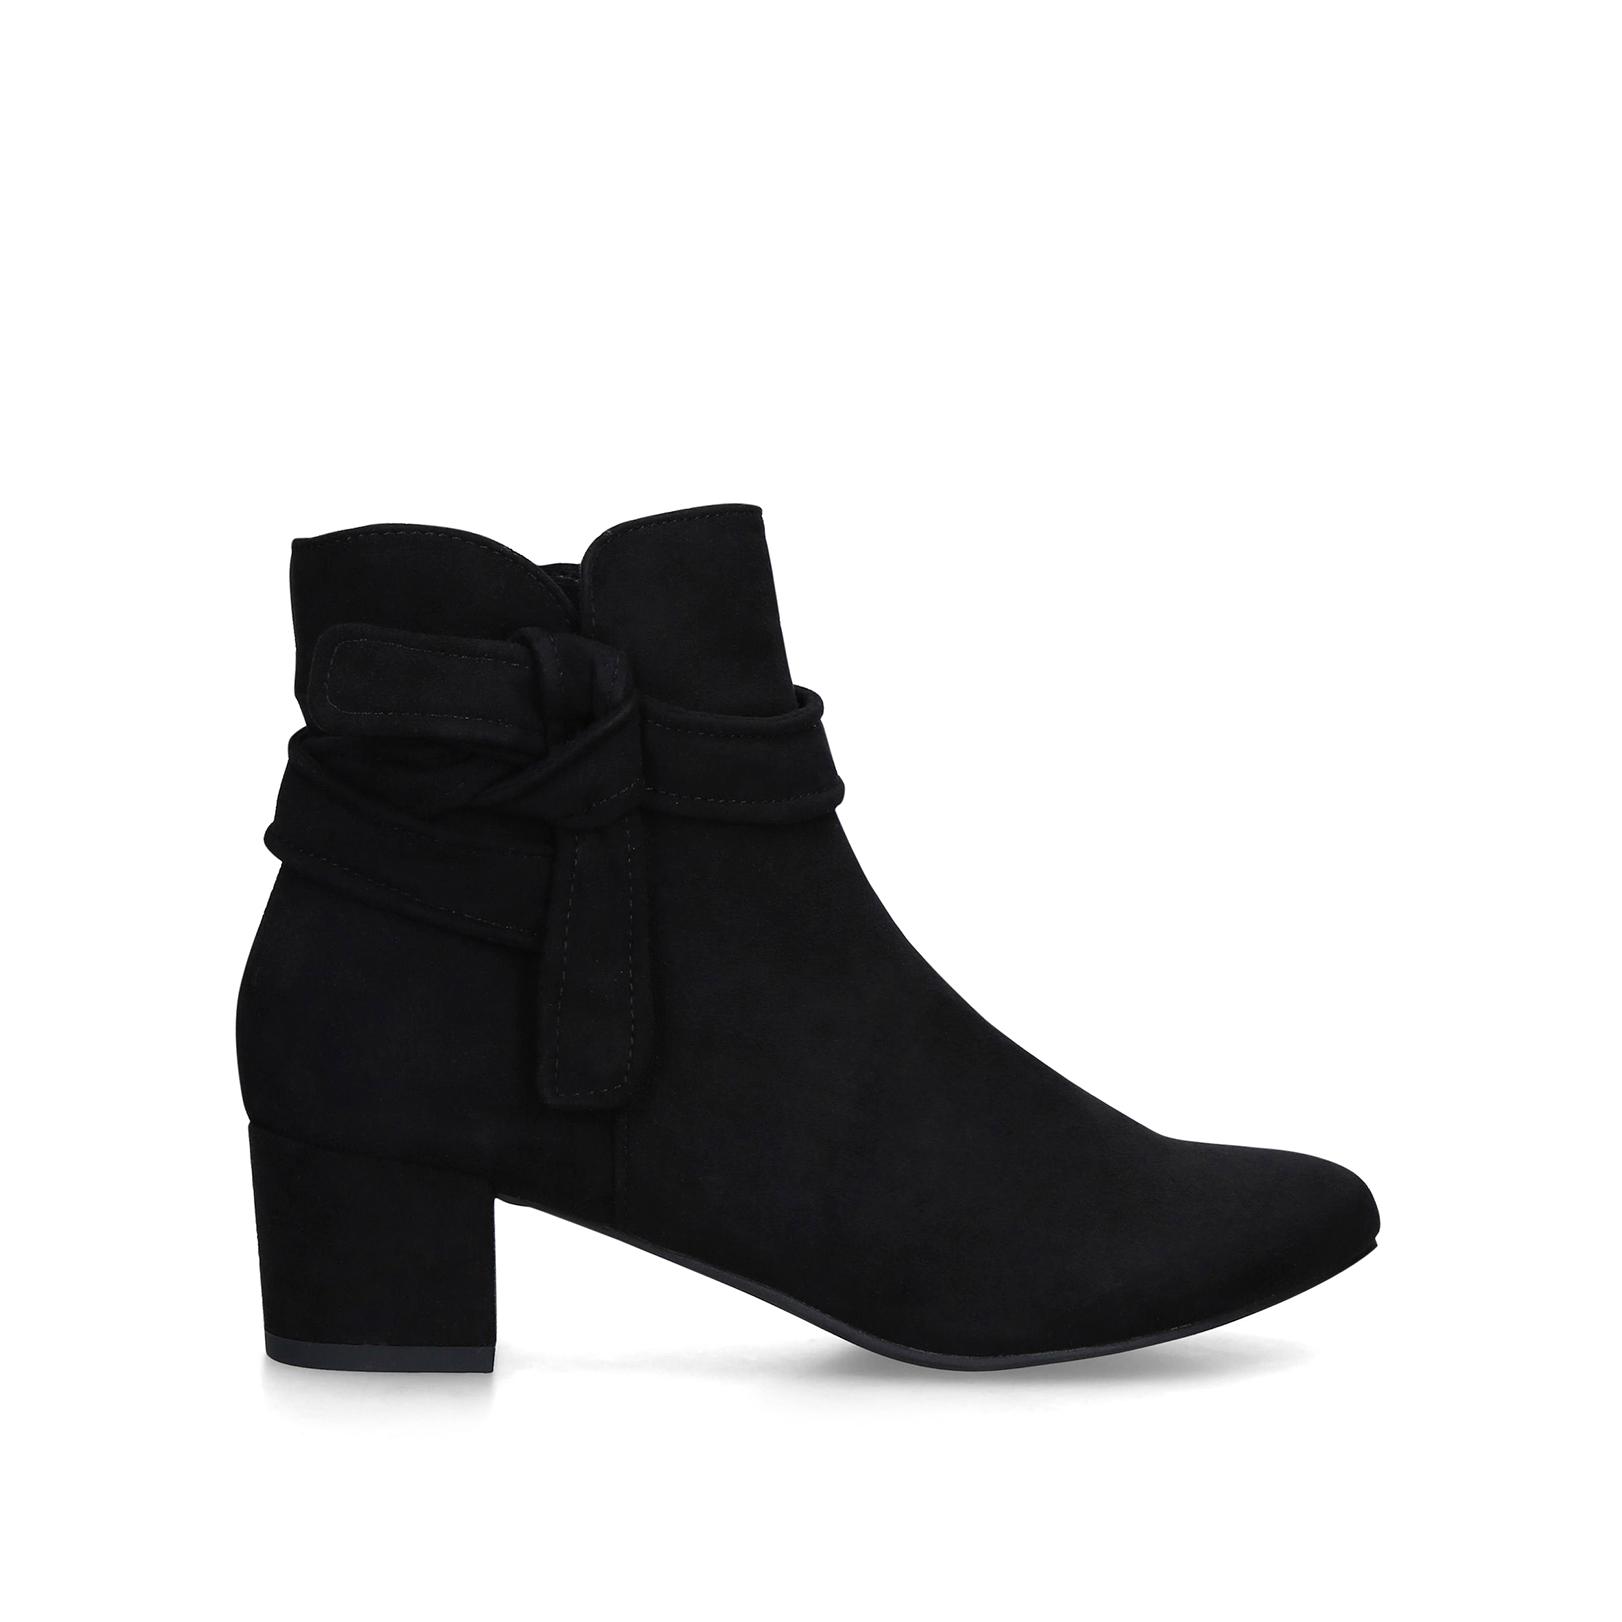 9 west ankle boots